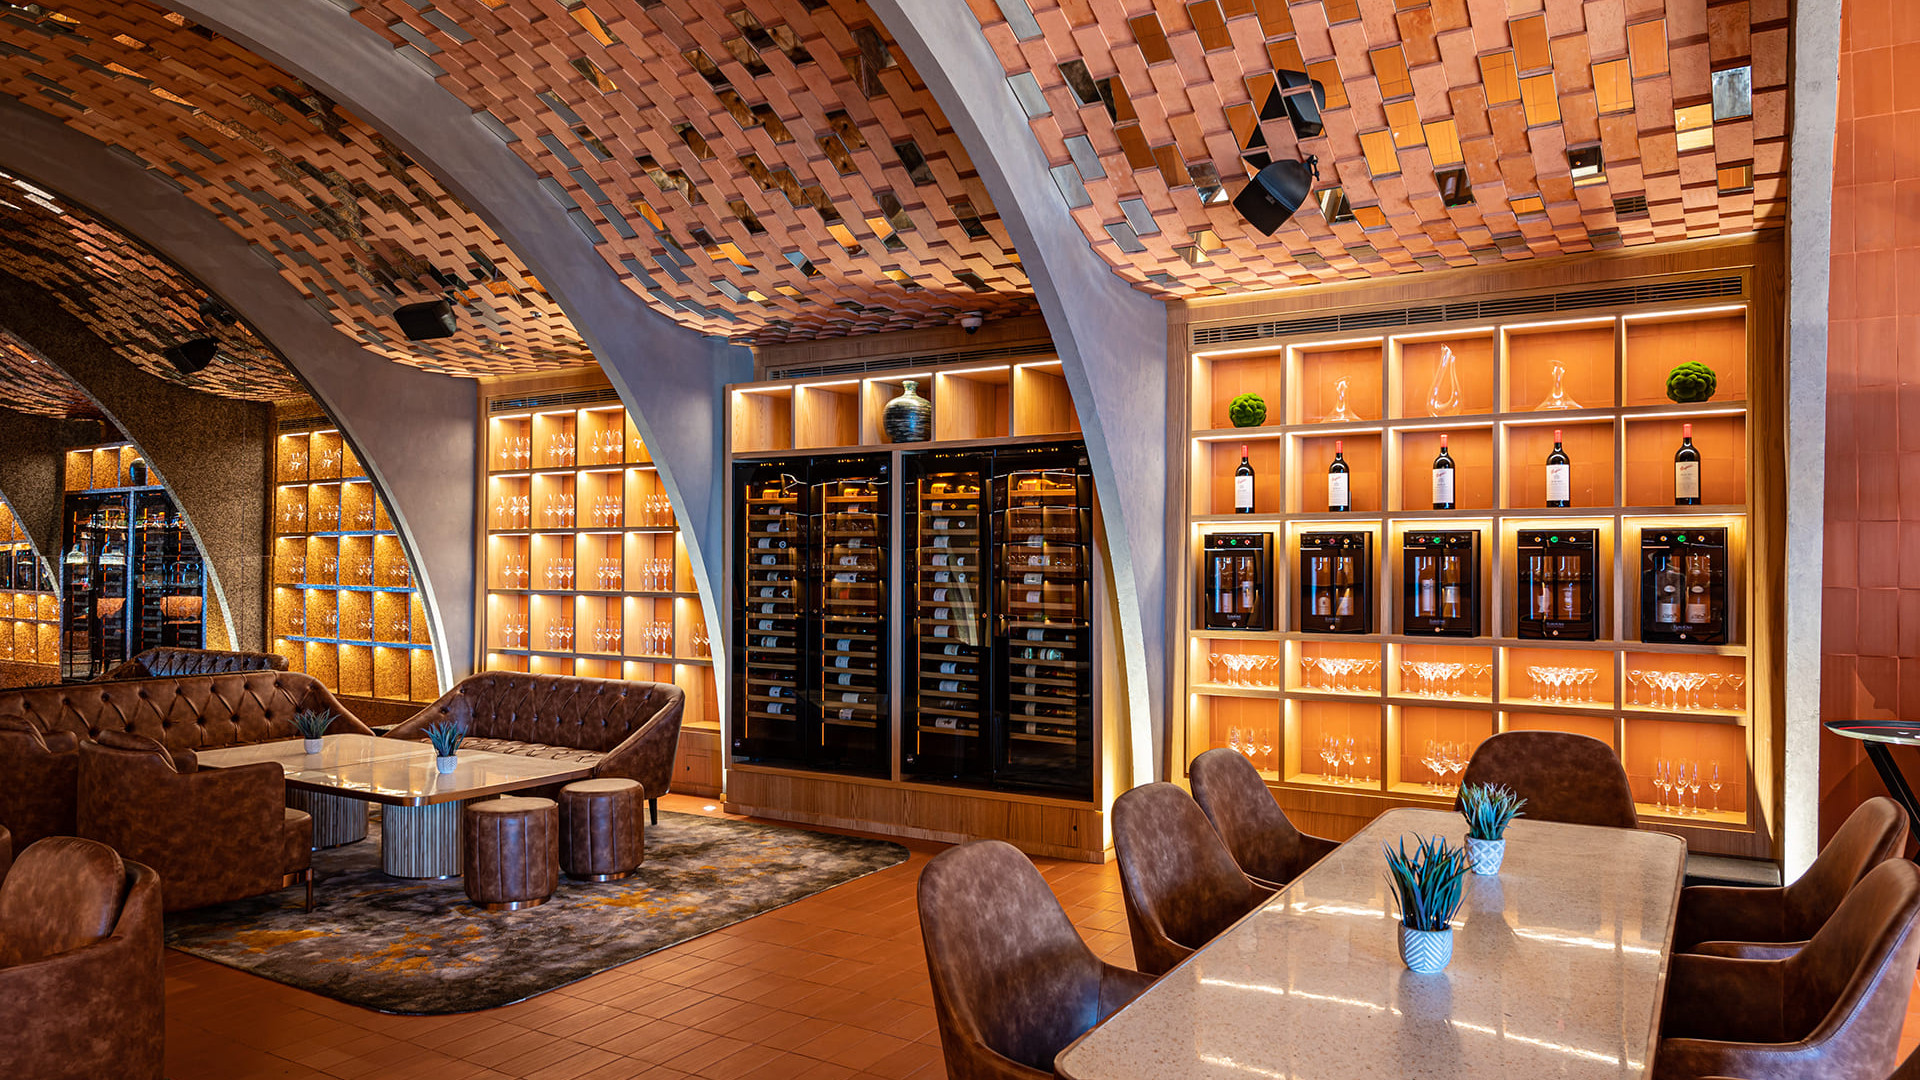 Breathtaking restaurant scenography with service wine coolers and wine bars integrated into custom-designed furniture. Exhibition bar to highlight the wine offer and generate customer interest.